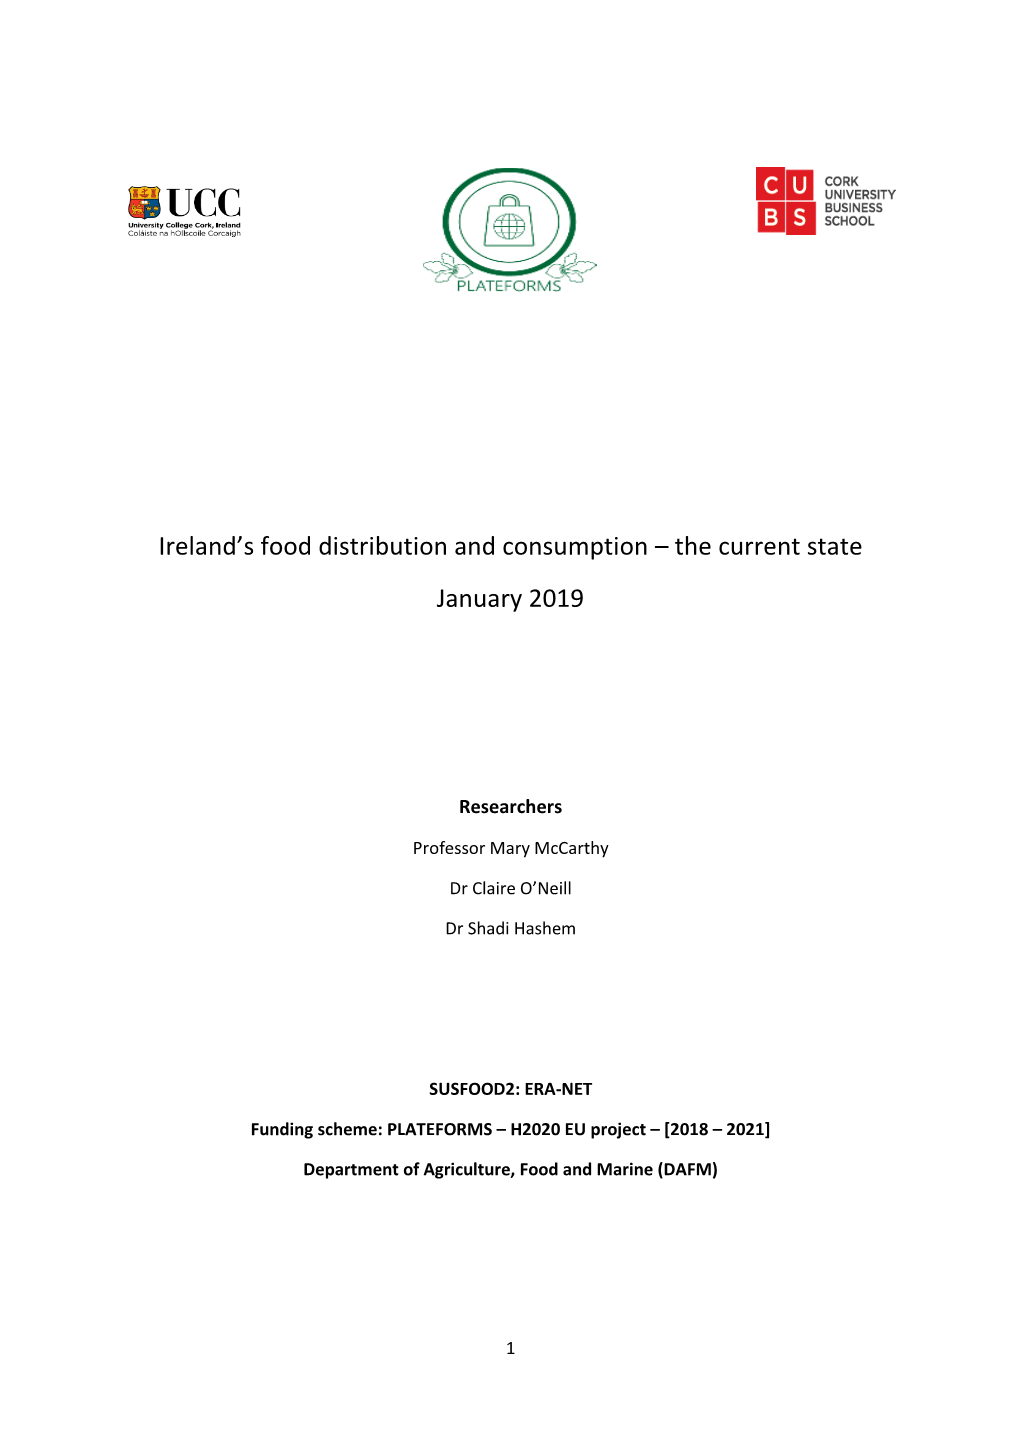 Ireland's Food Distribution and Consumption – the Current State January 2019